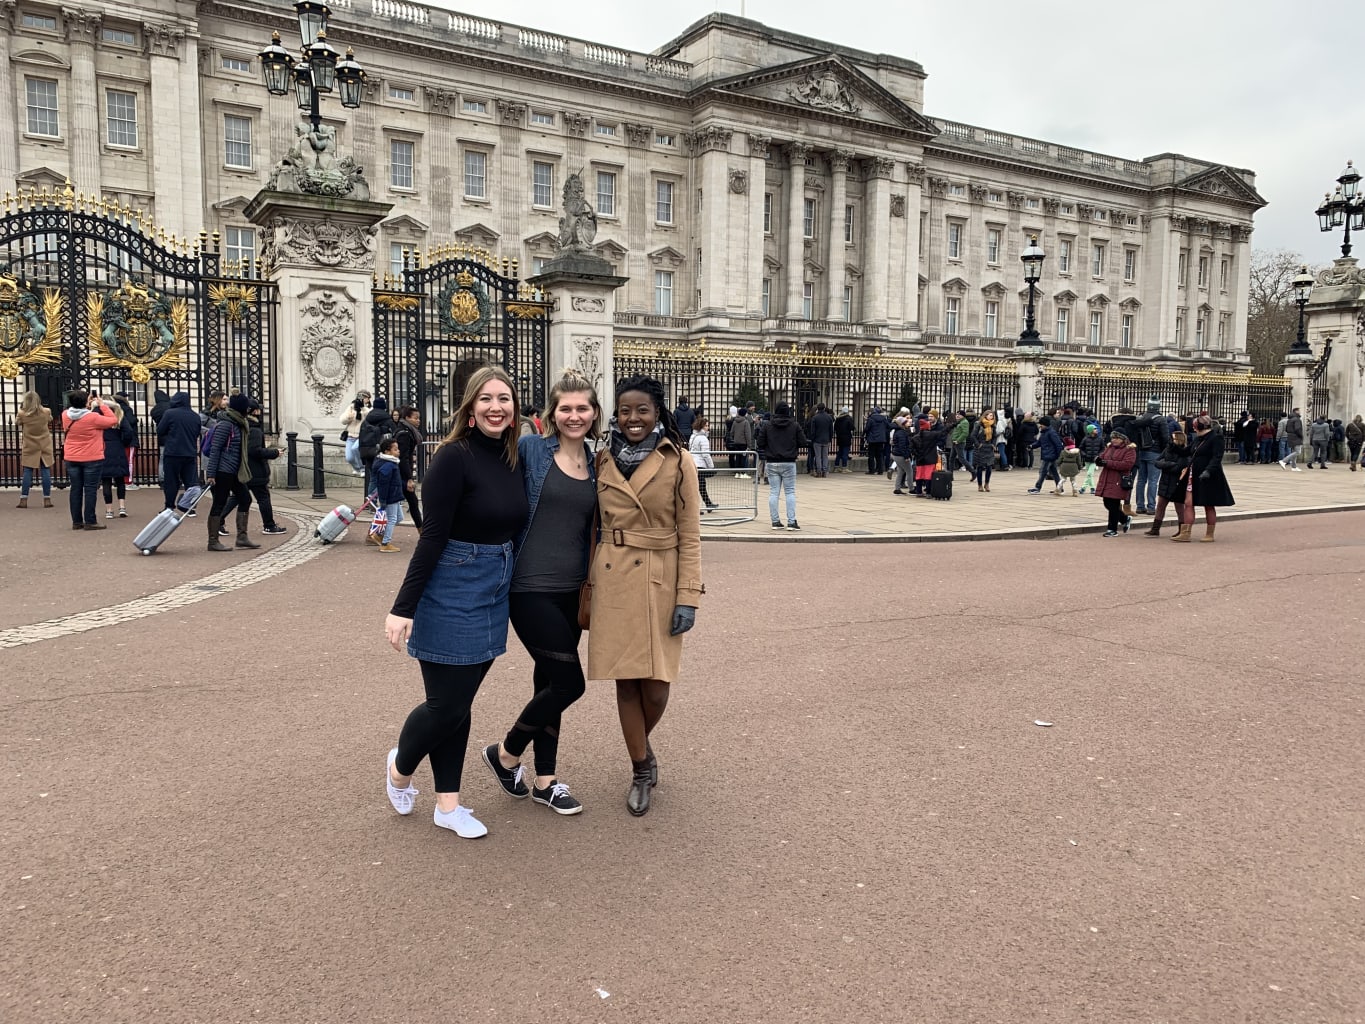 Three students in front of Buckingham Palace.